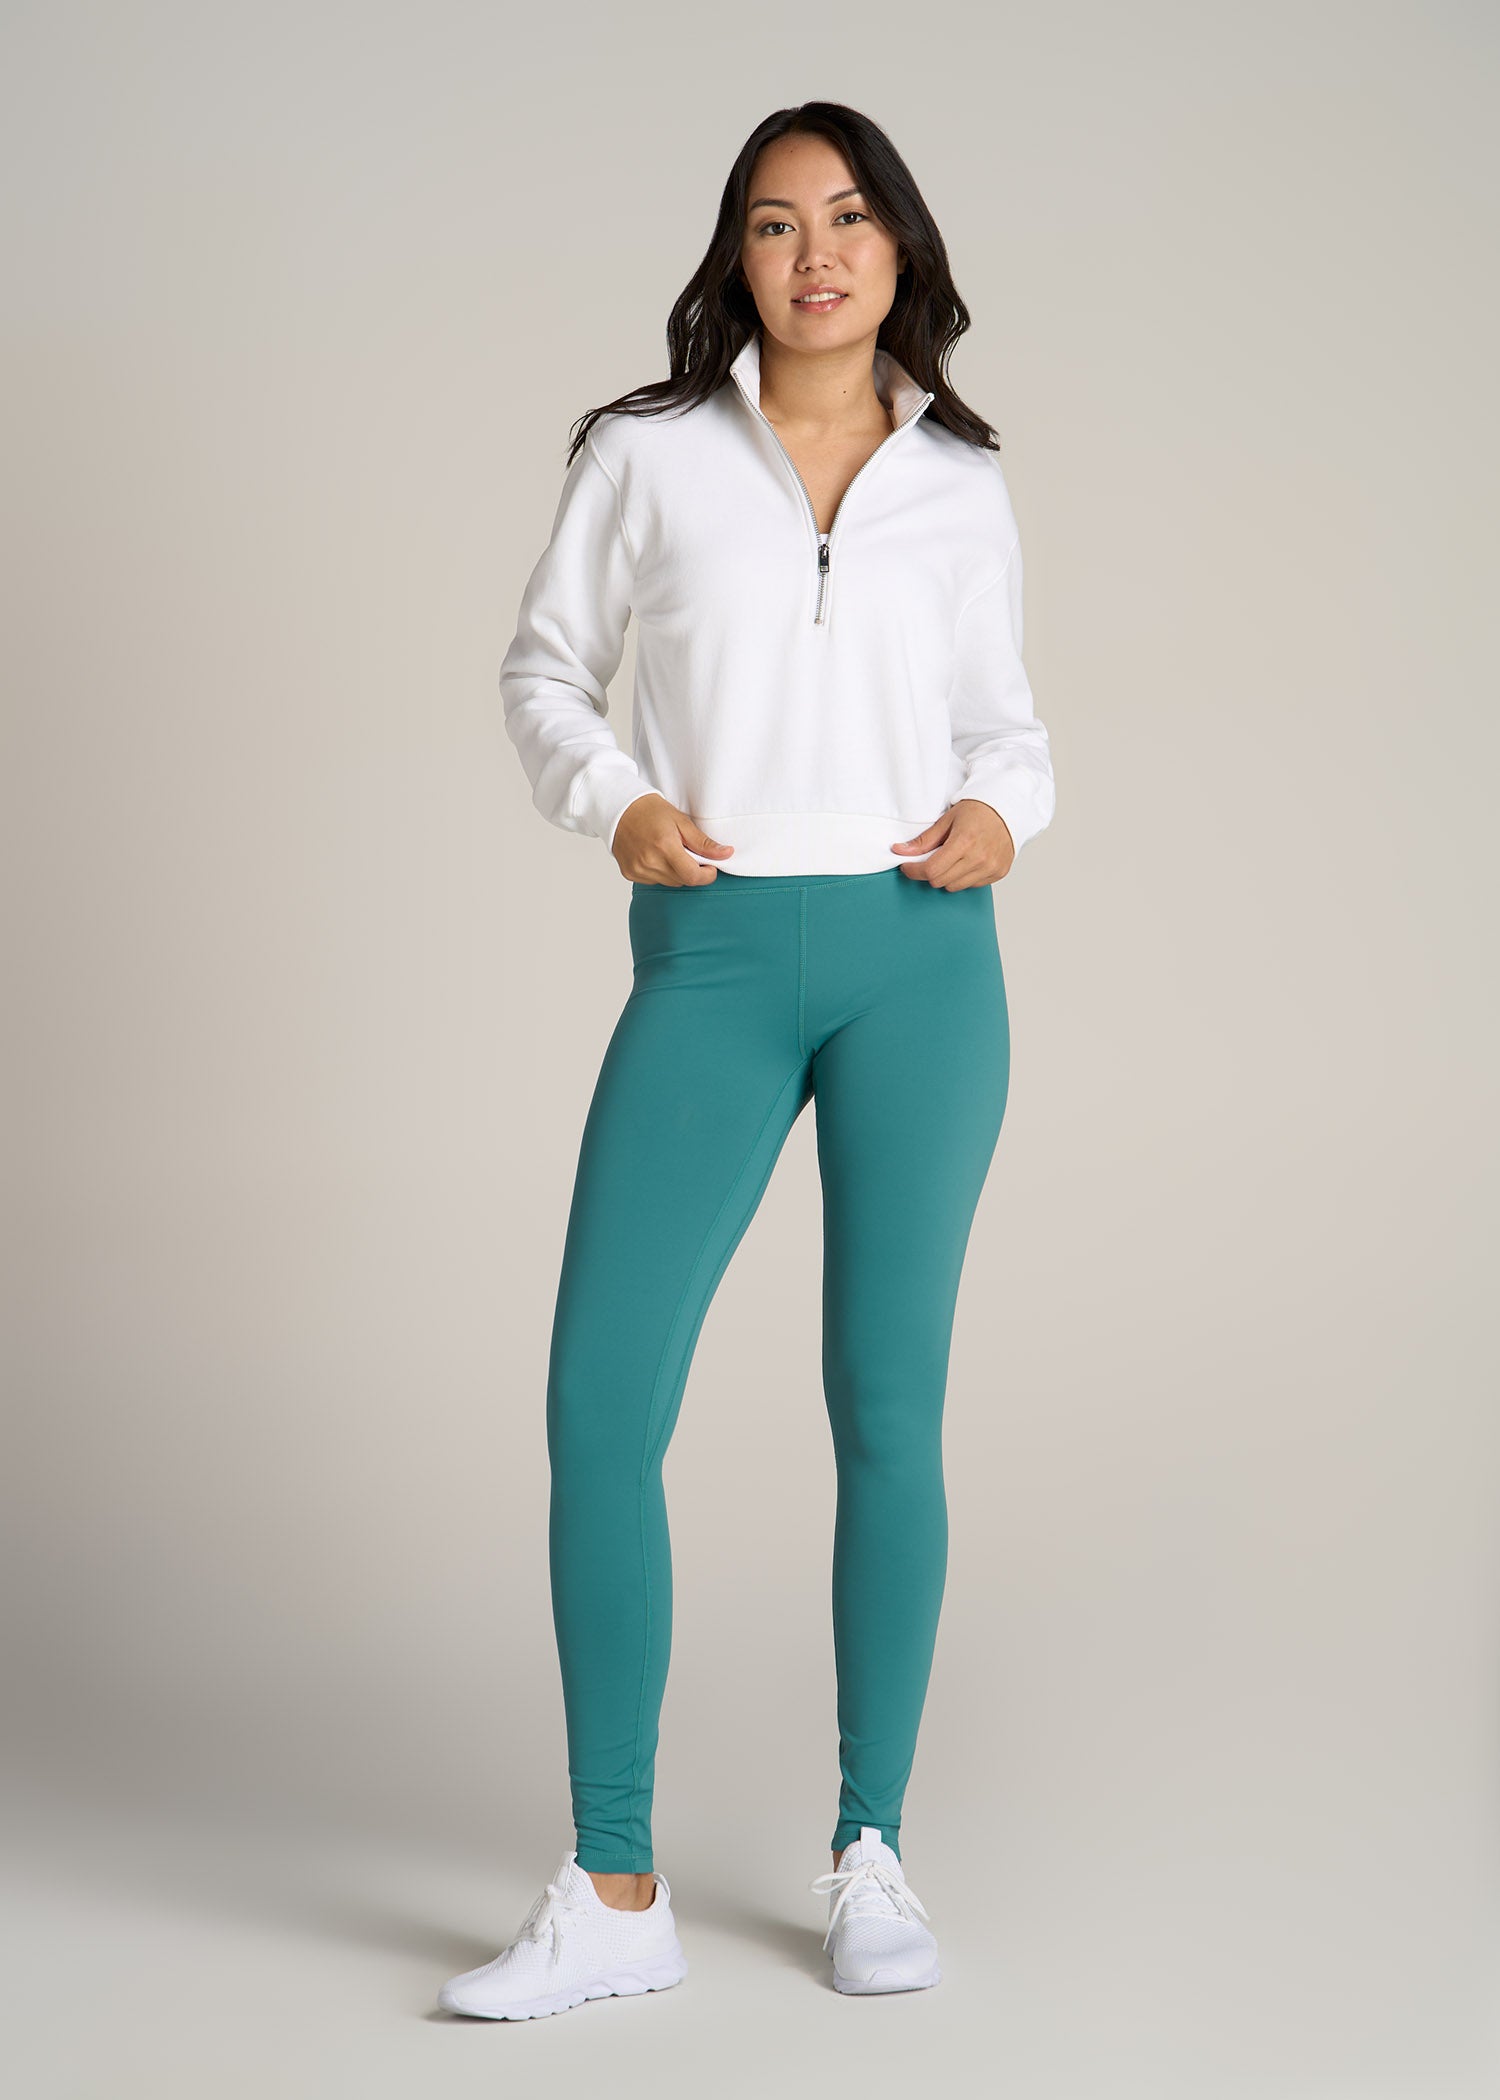 Movement High Rise Cheeky Leggings for Tall Women in Light Teal